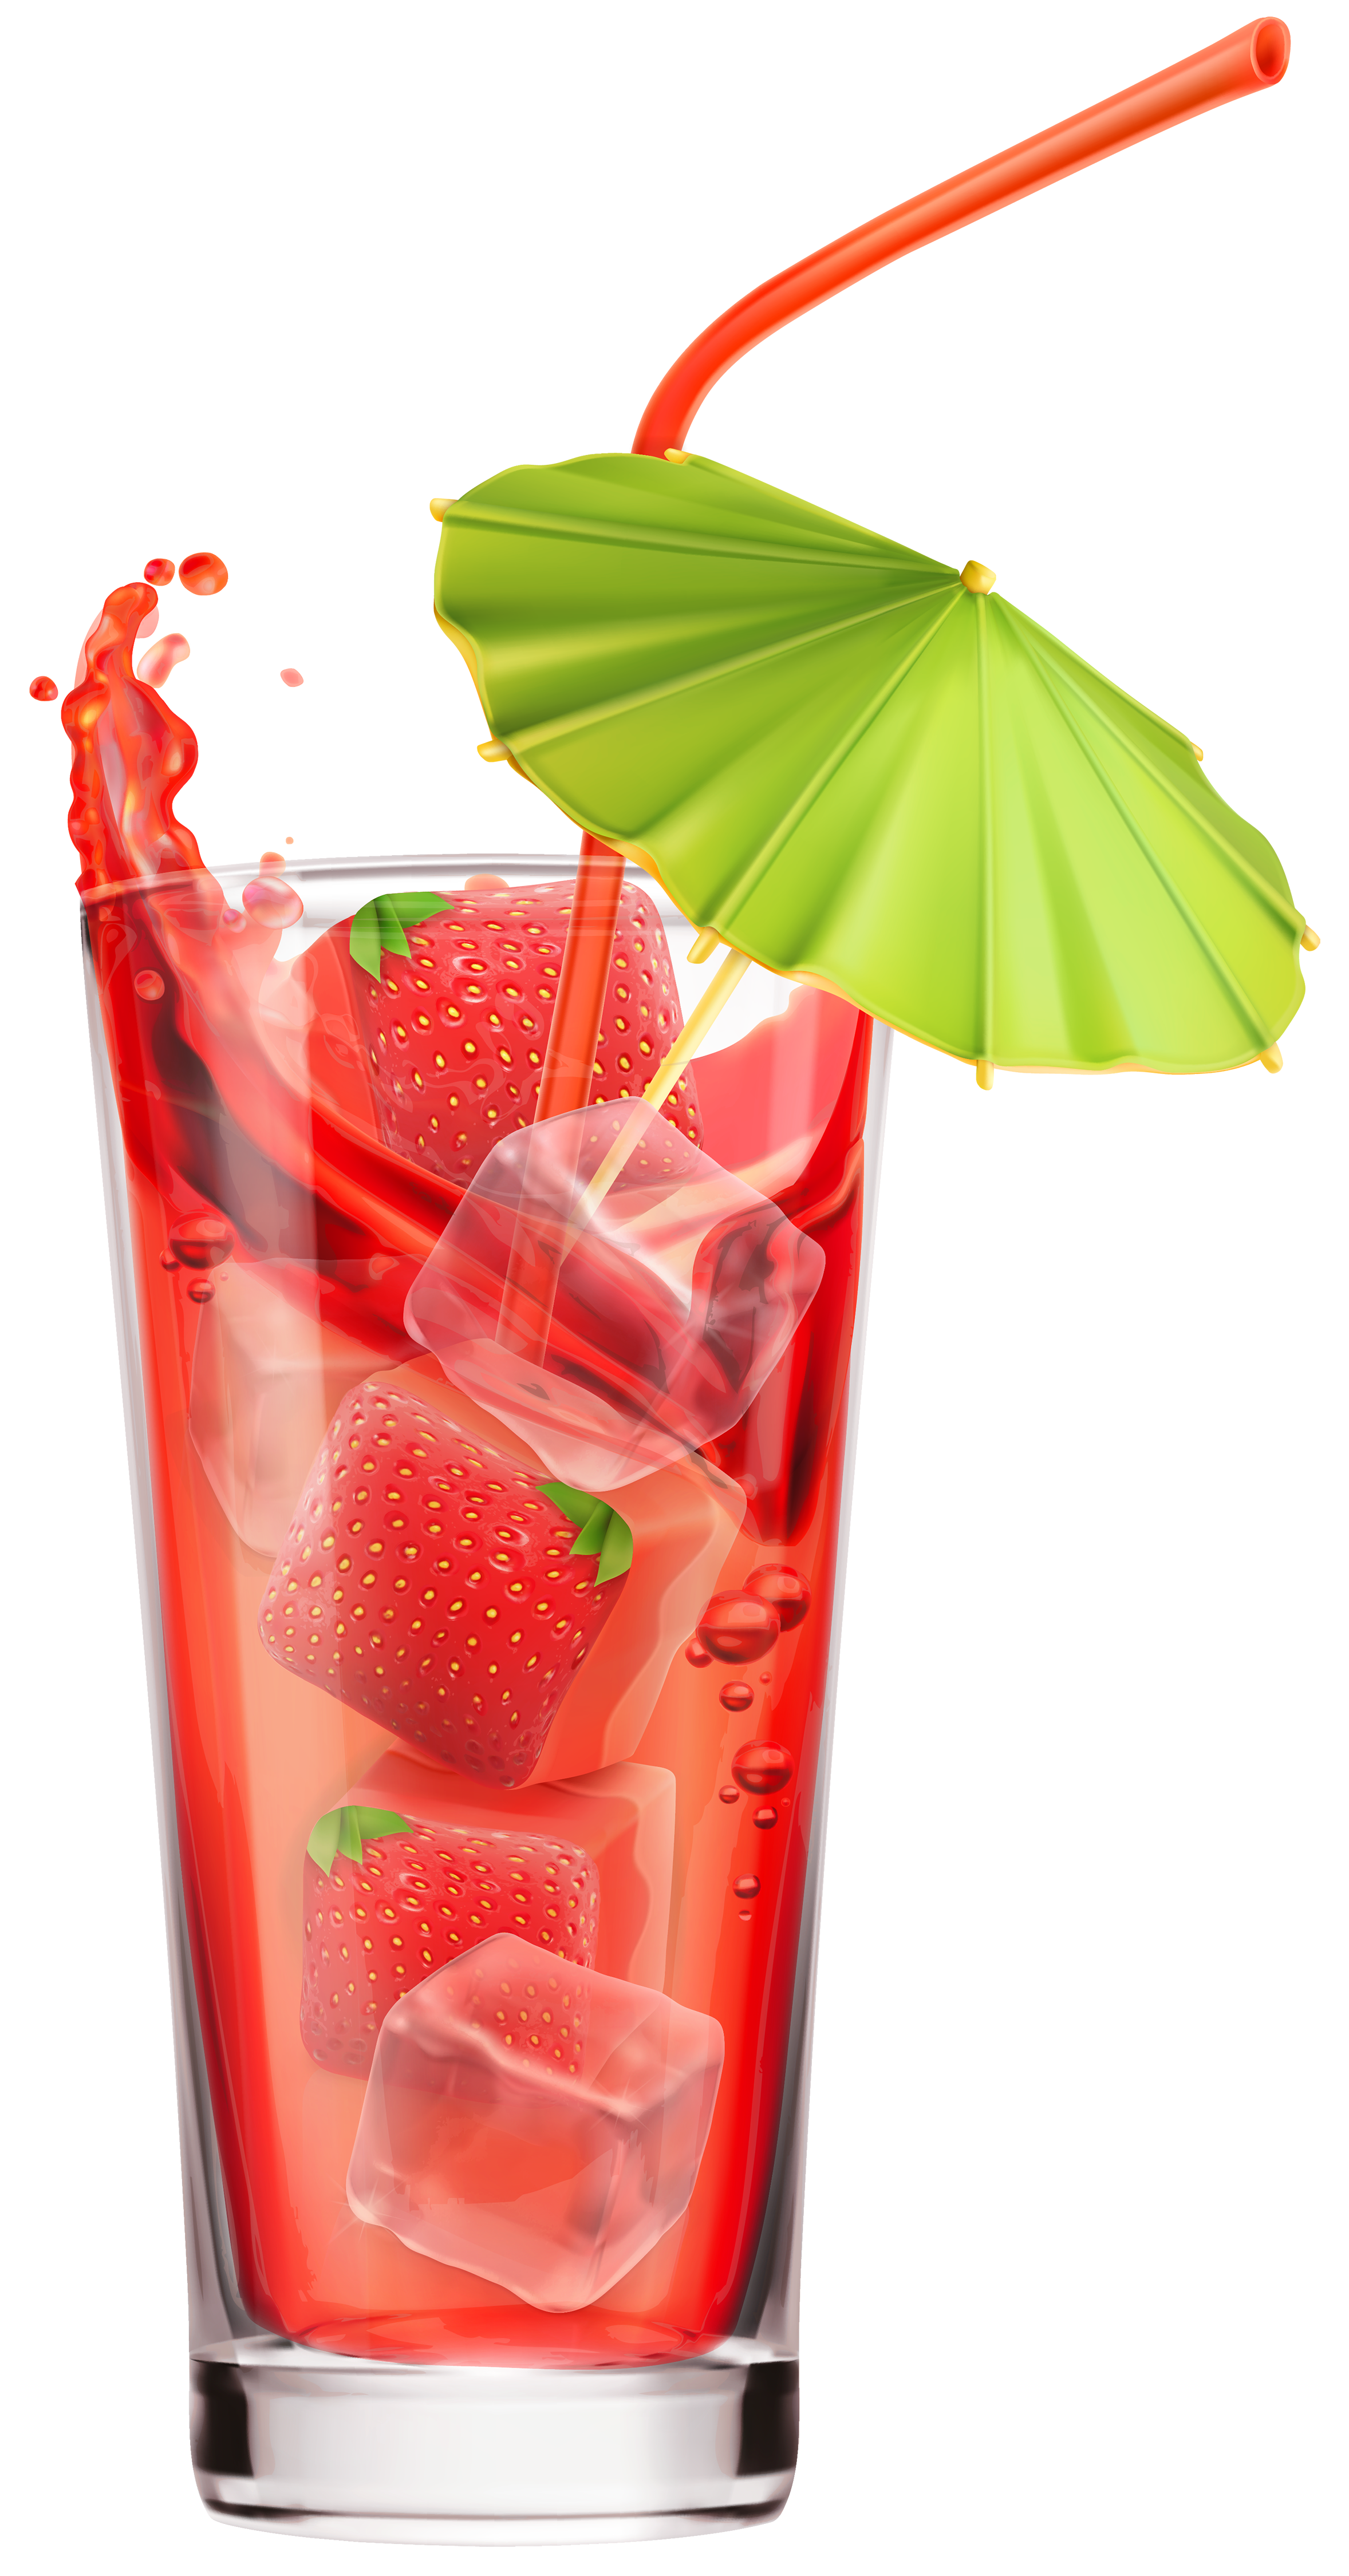 Sandwich clipart juice. Strawberry cocktail png image